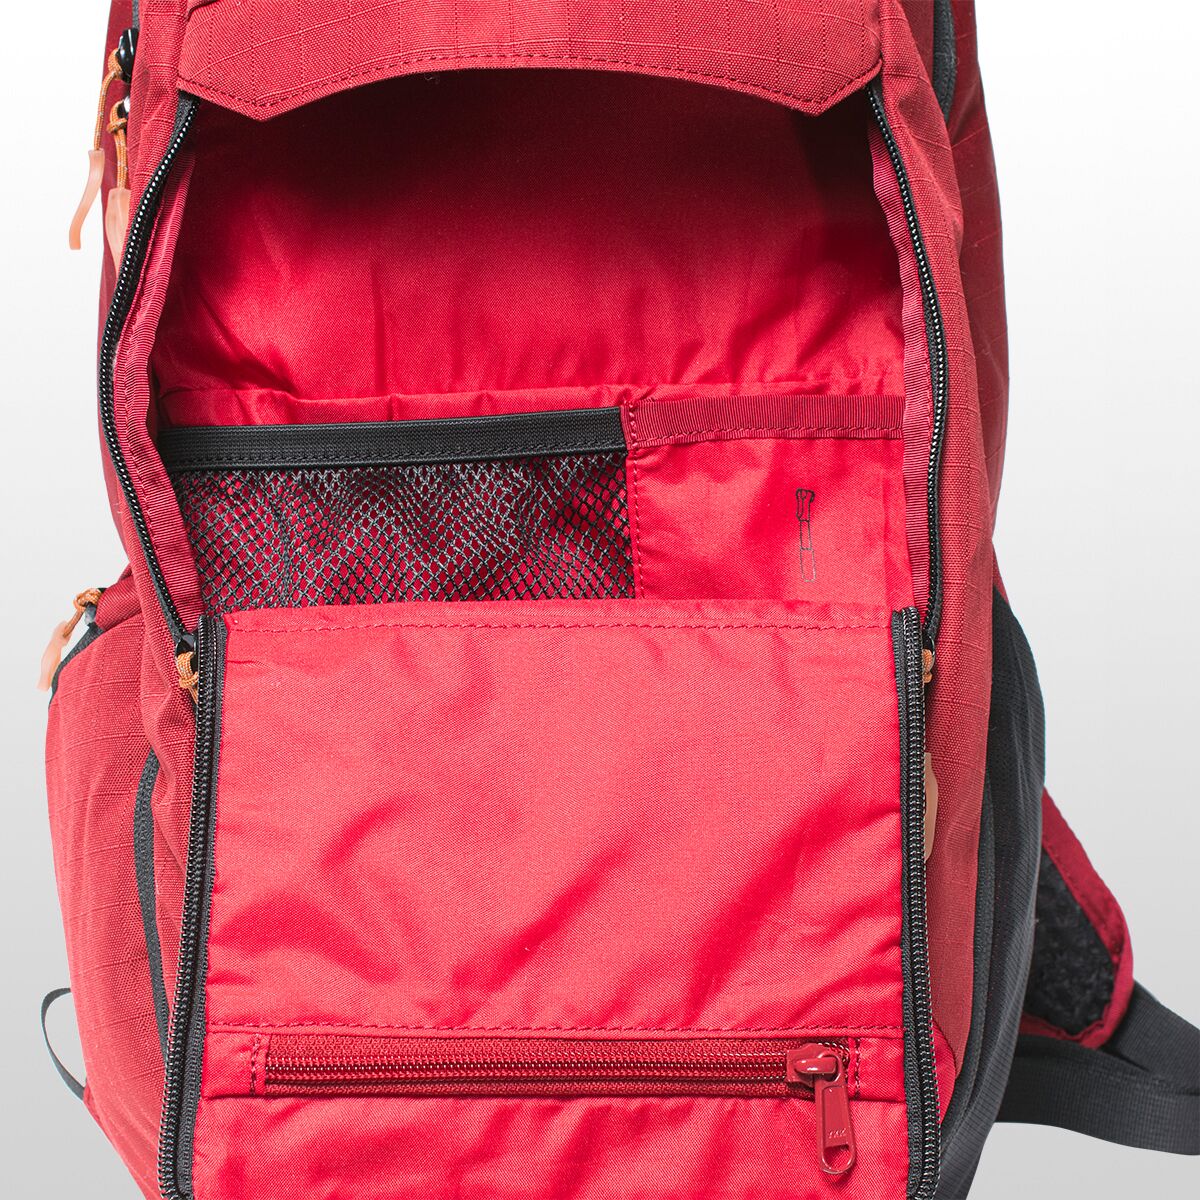 DAKINE Syncline 16L Hydration Pack | Backcountry.com